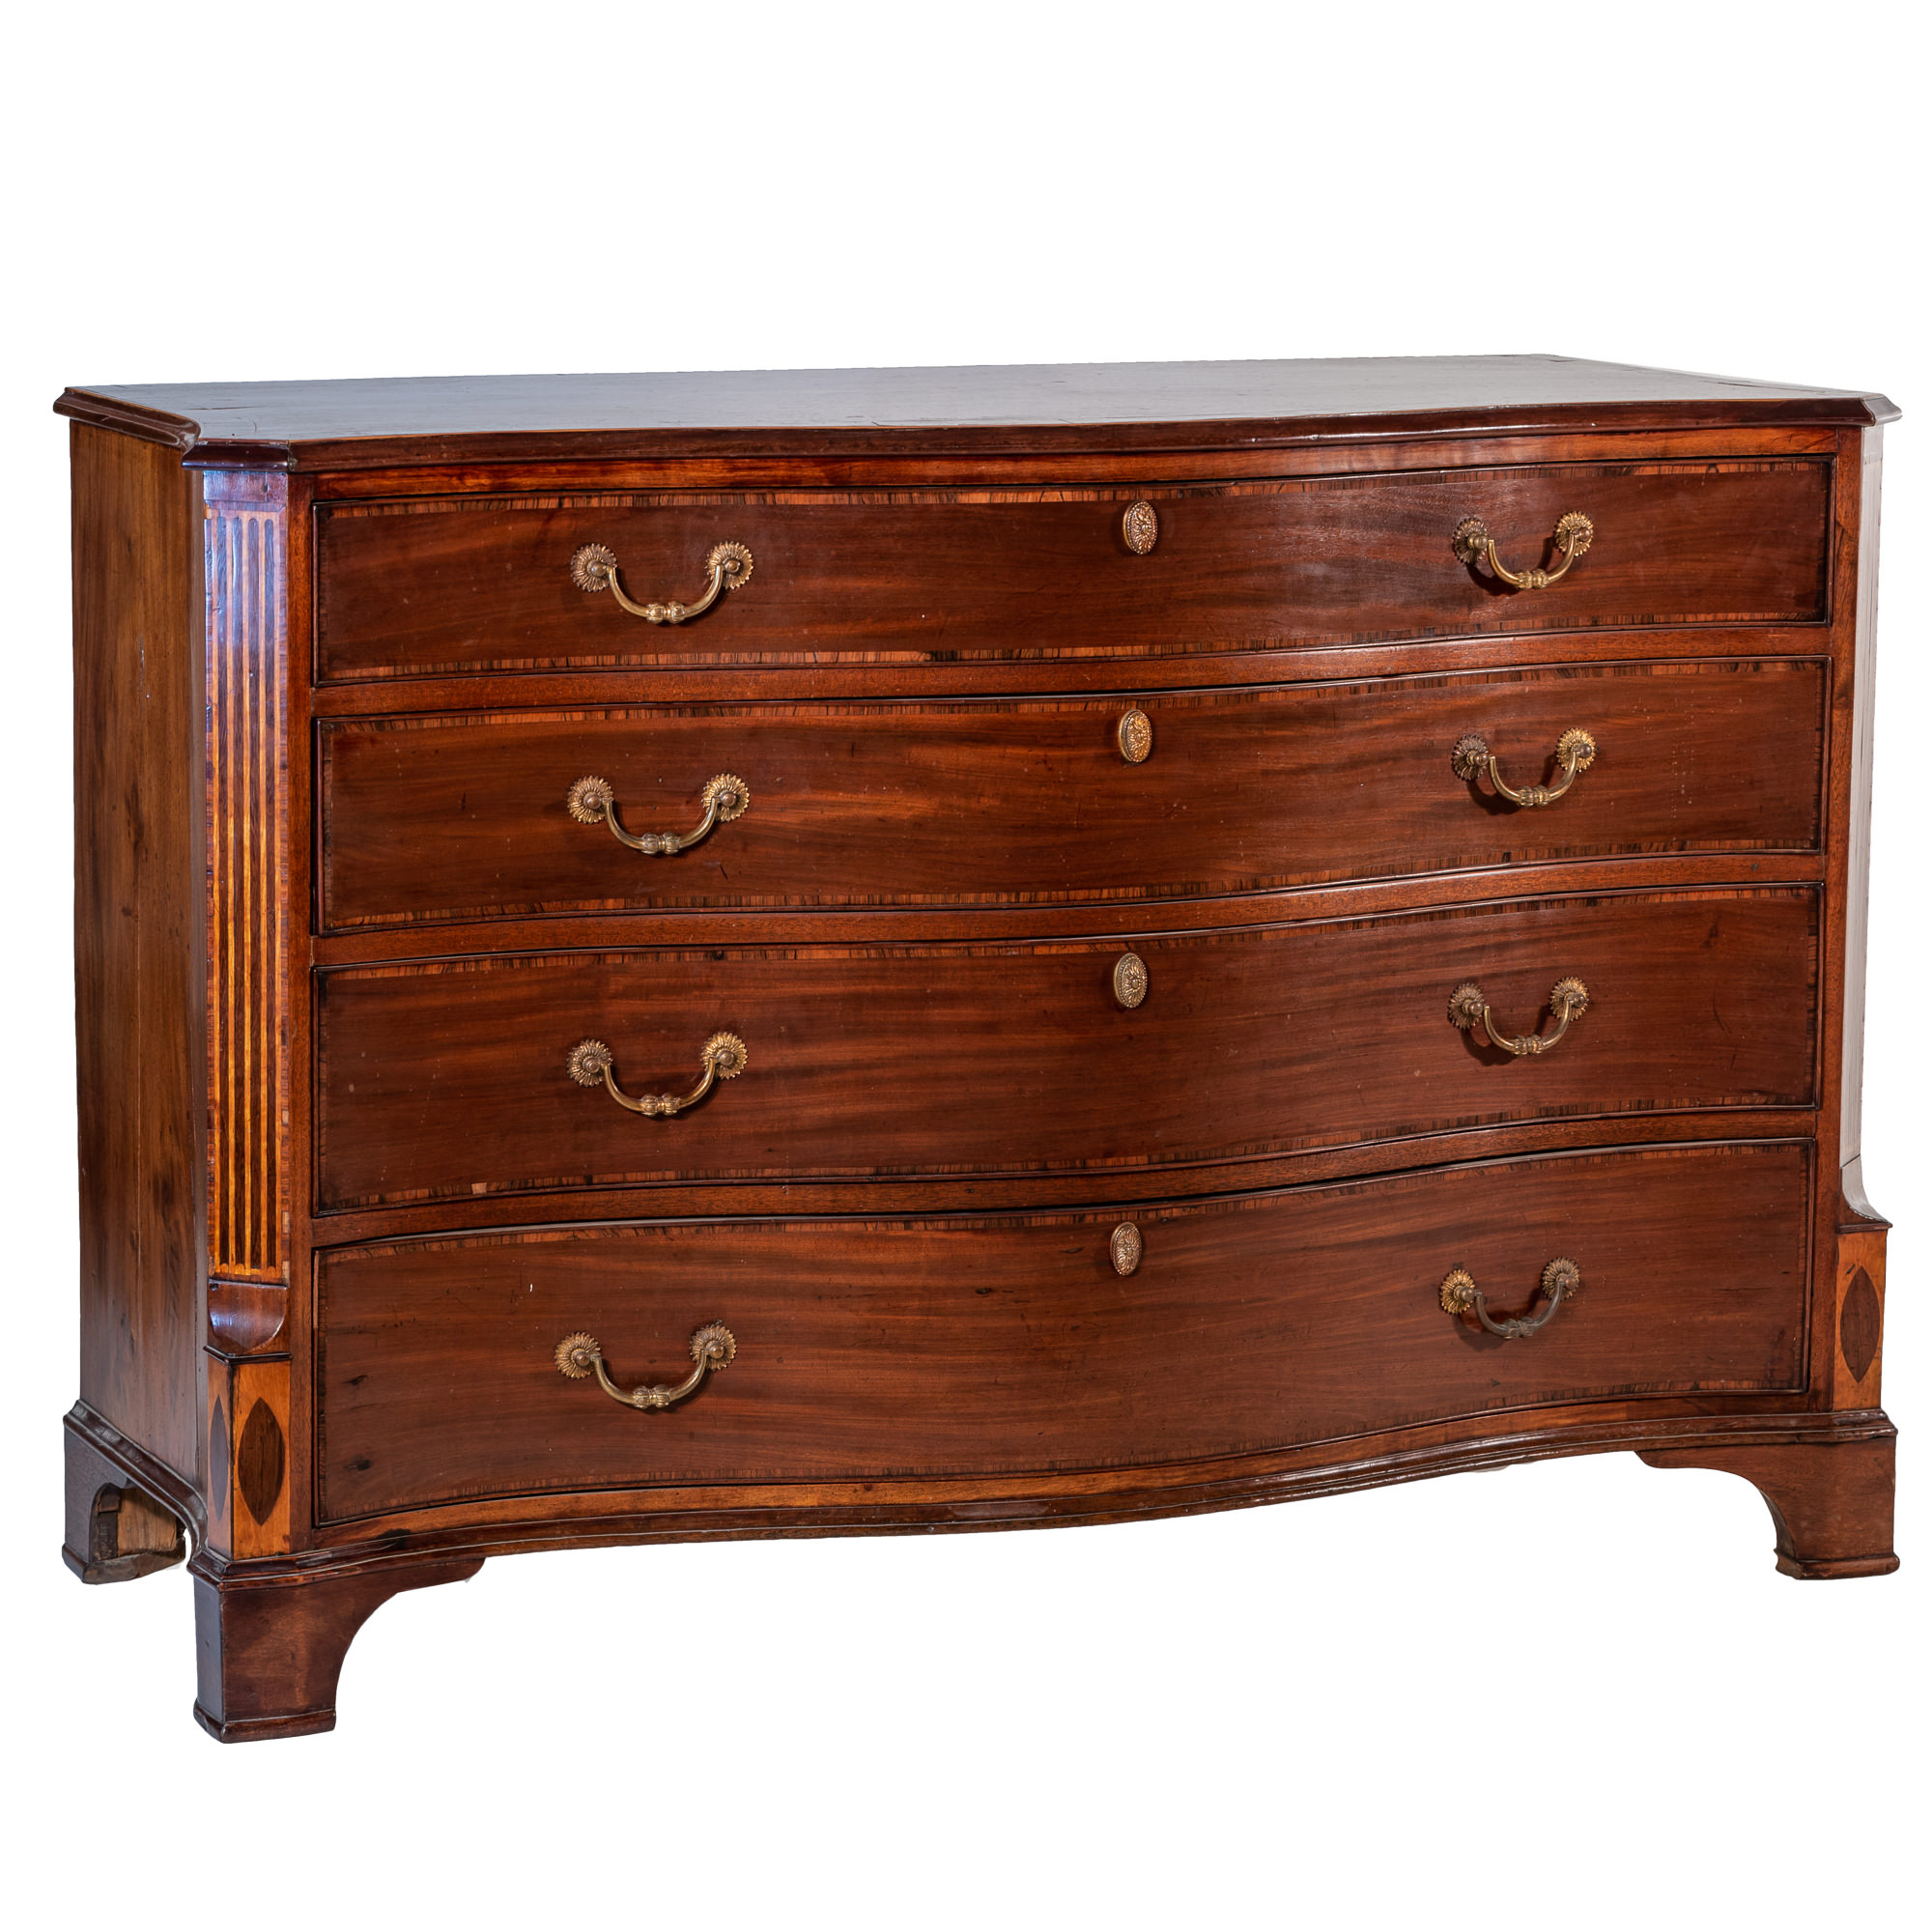 'George III Inlaid and Crossbanded Mahogany Serpentine Chest of Drawers Circa 1780'